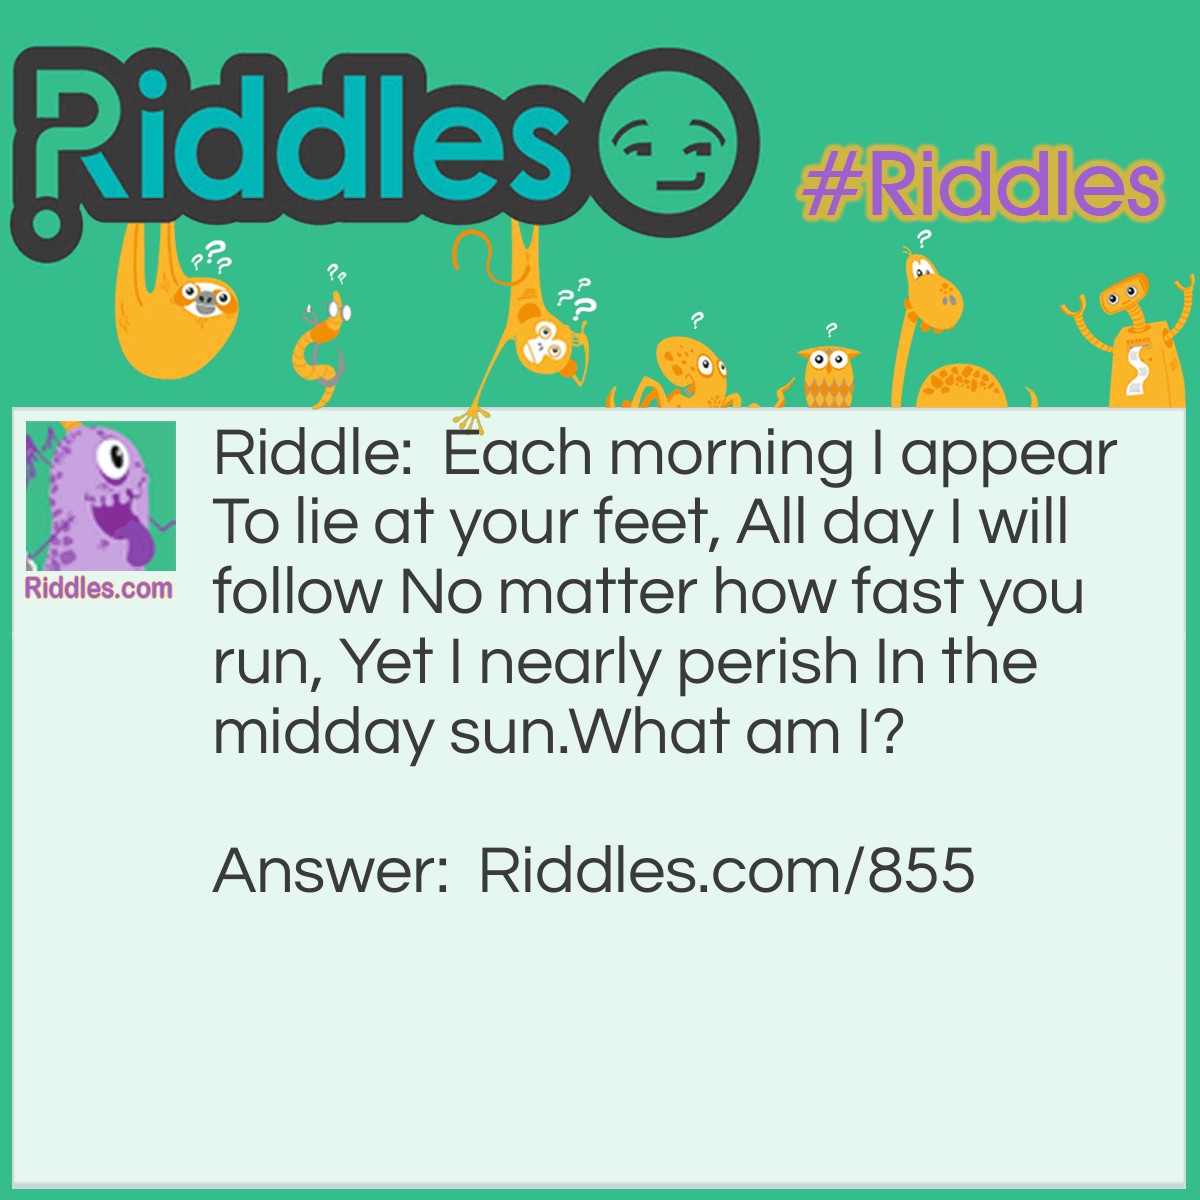 Riddle: Each morning I appear To lie at your feet, All day I will follow No matter how fast you run, Yet I nearly perish In the midday sun.
What am I? Answer: I am your shadow.